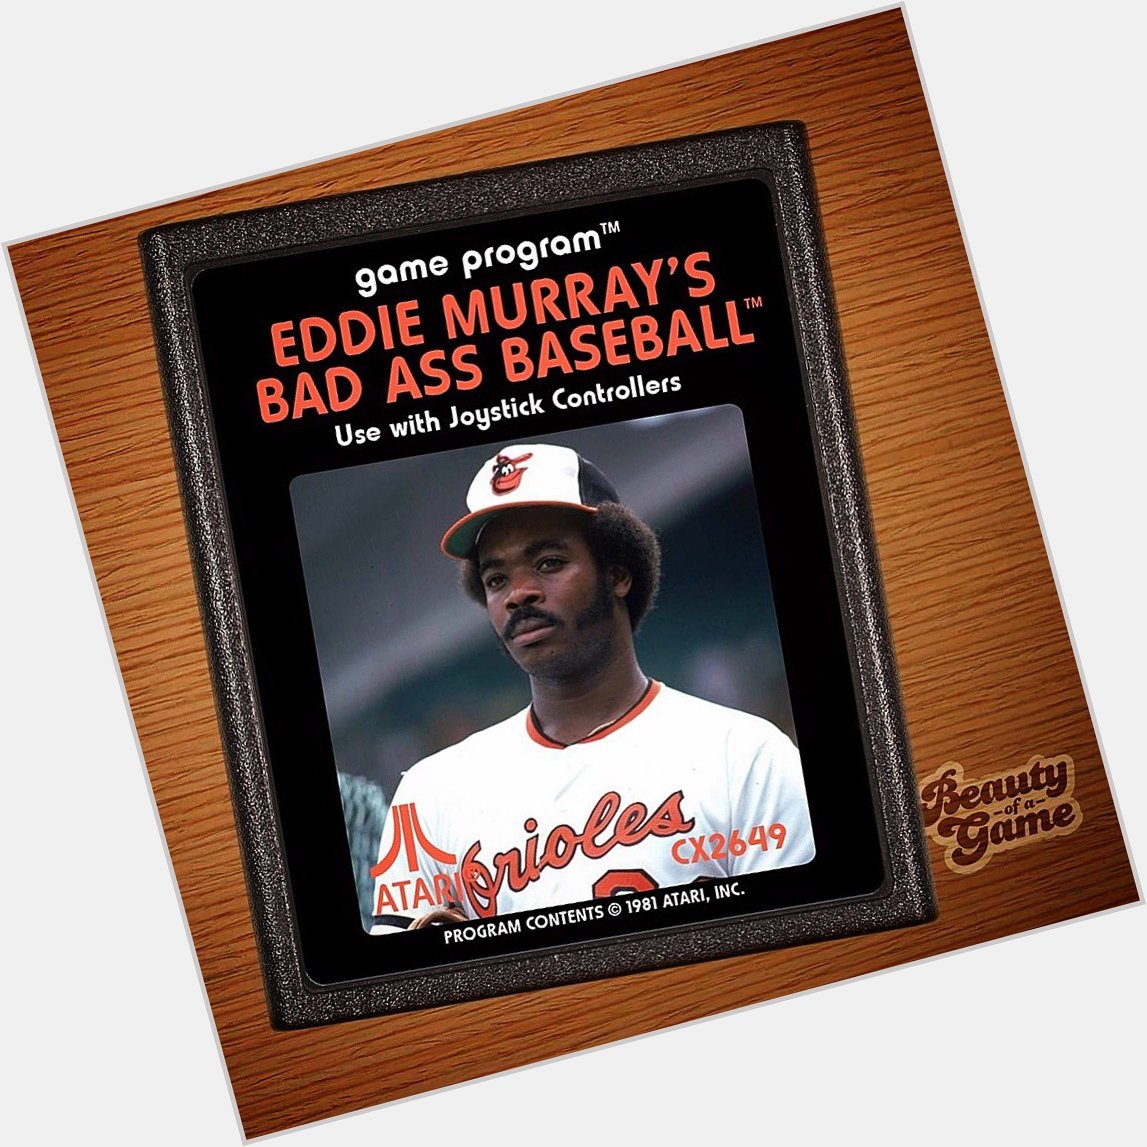 Happy Birthday to the incomparable Eddie Murray! 